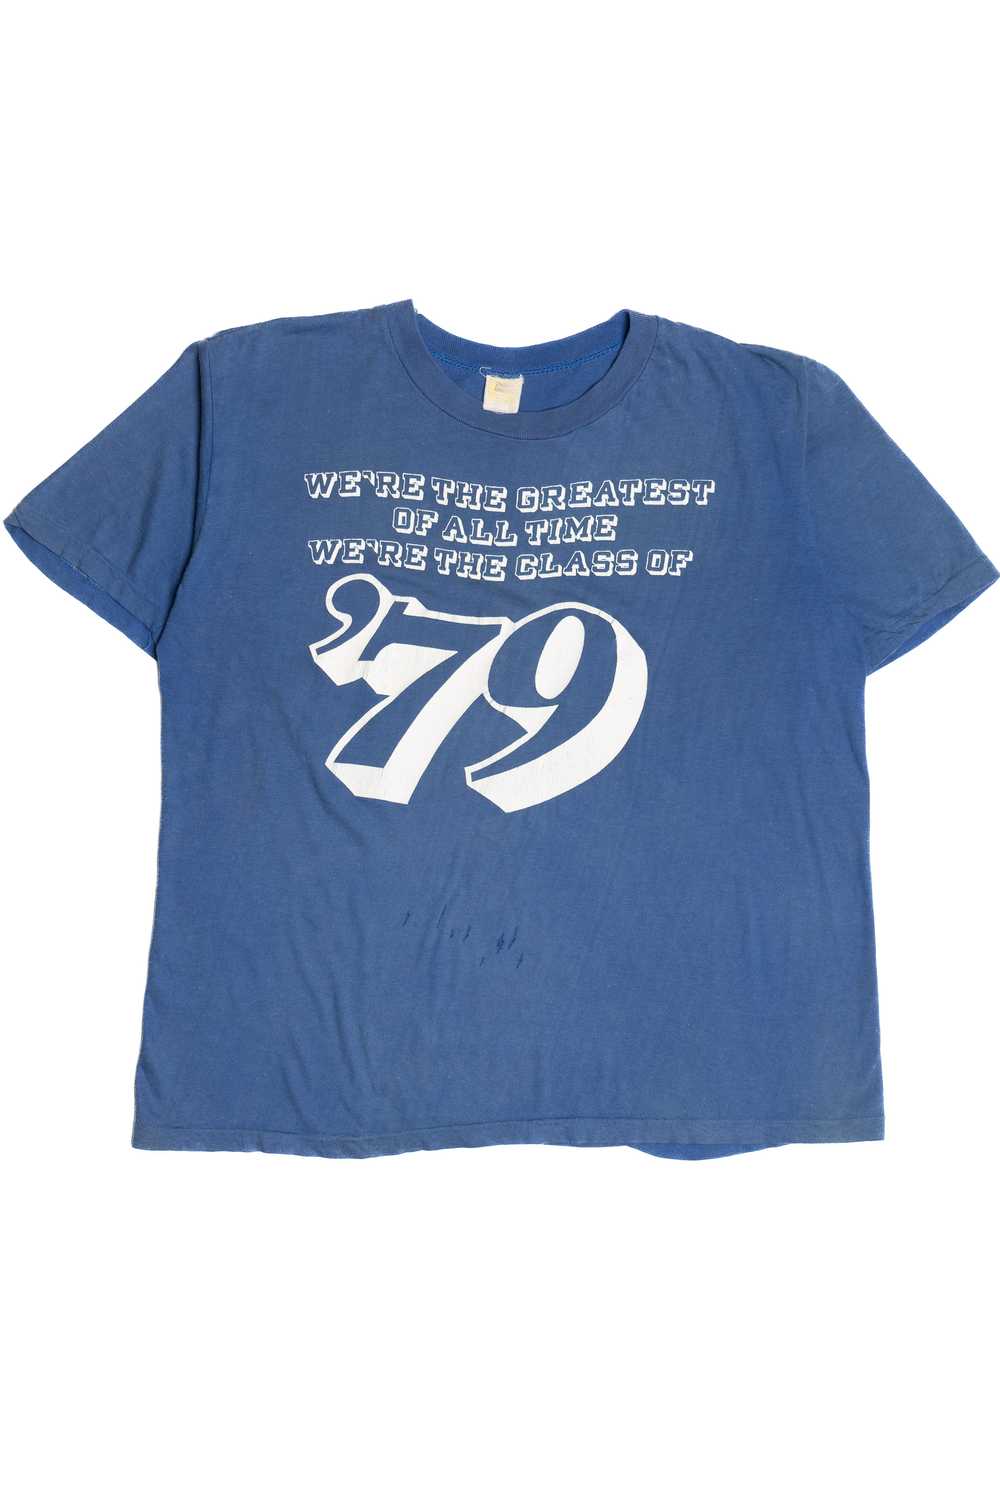 Vintage Distressed "Class of '79" T-Shirt (1970s) - image 1